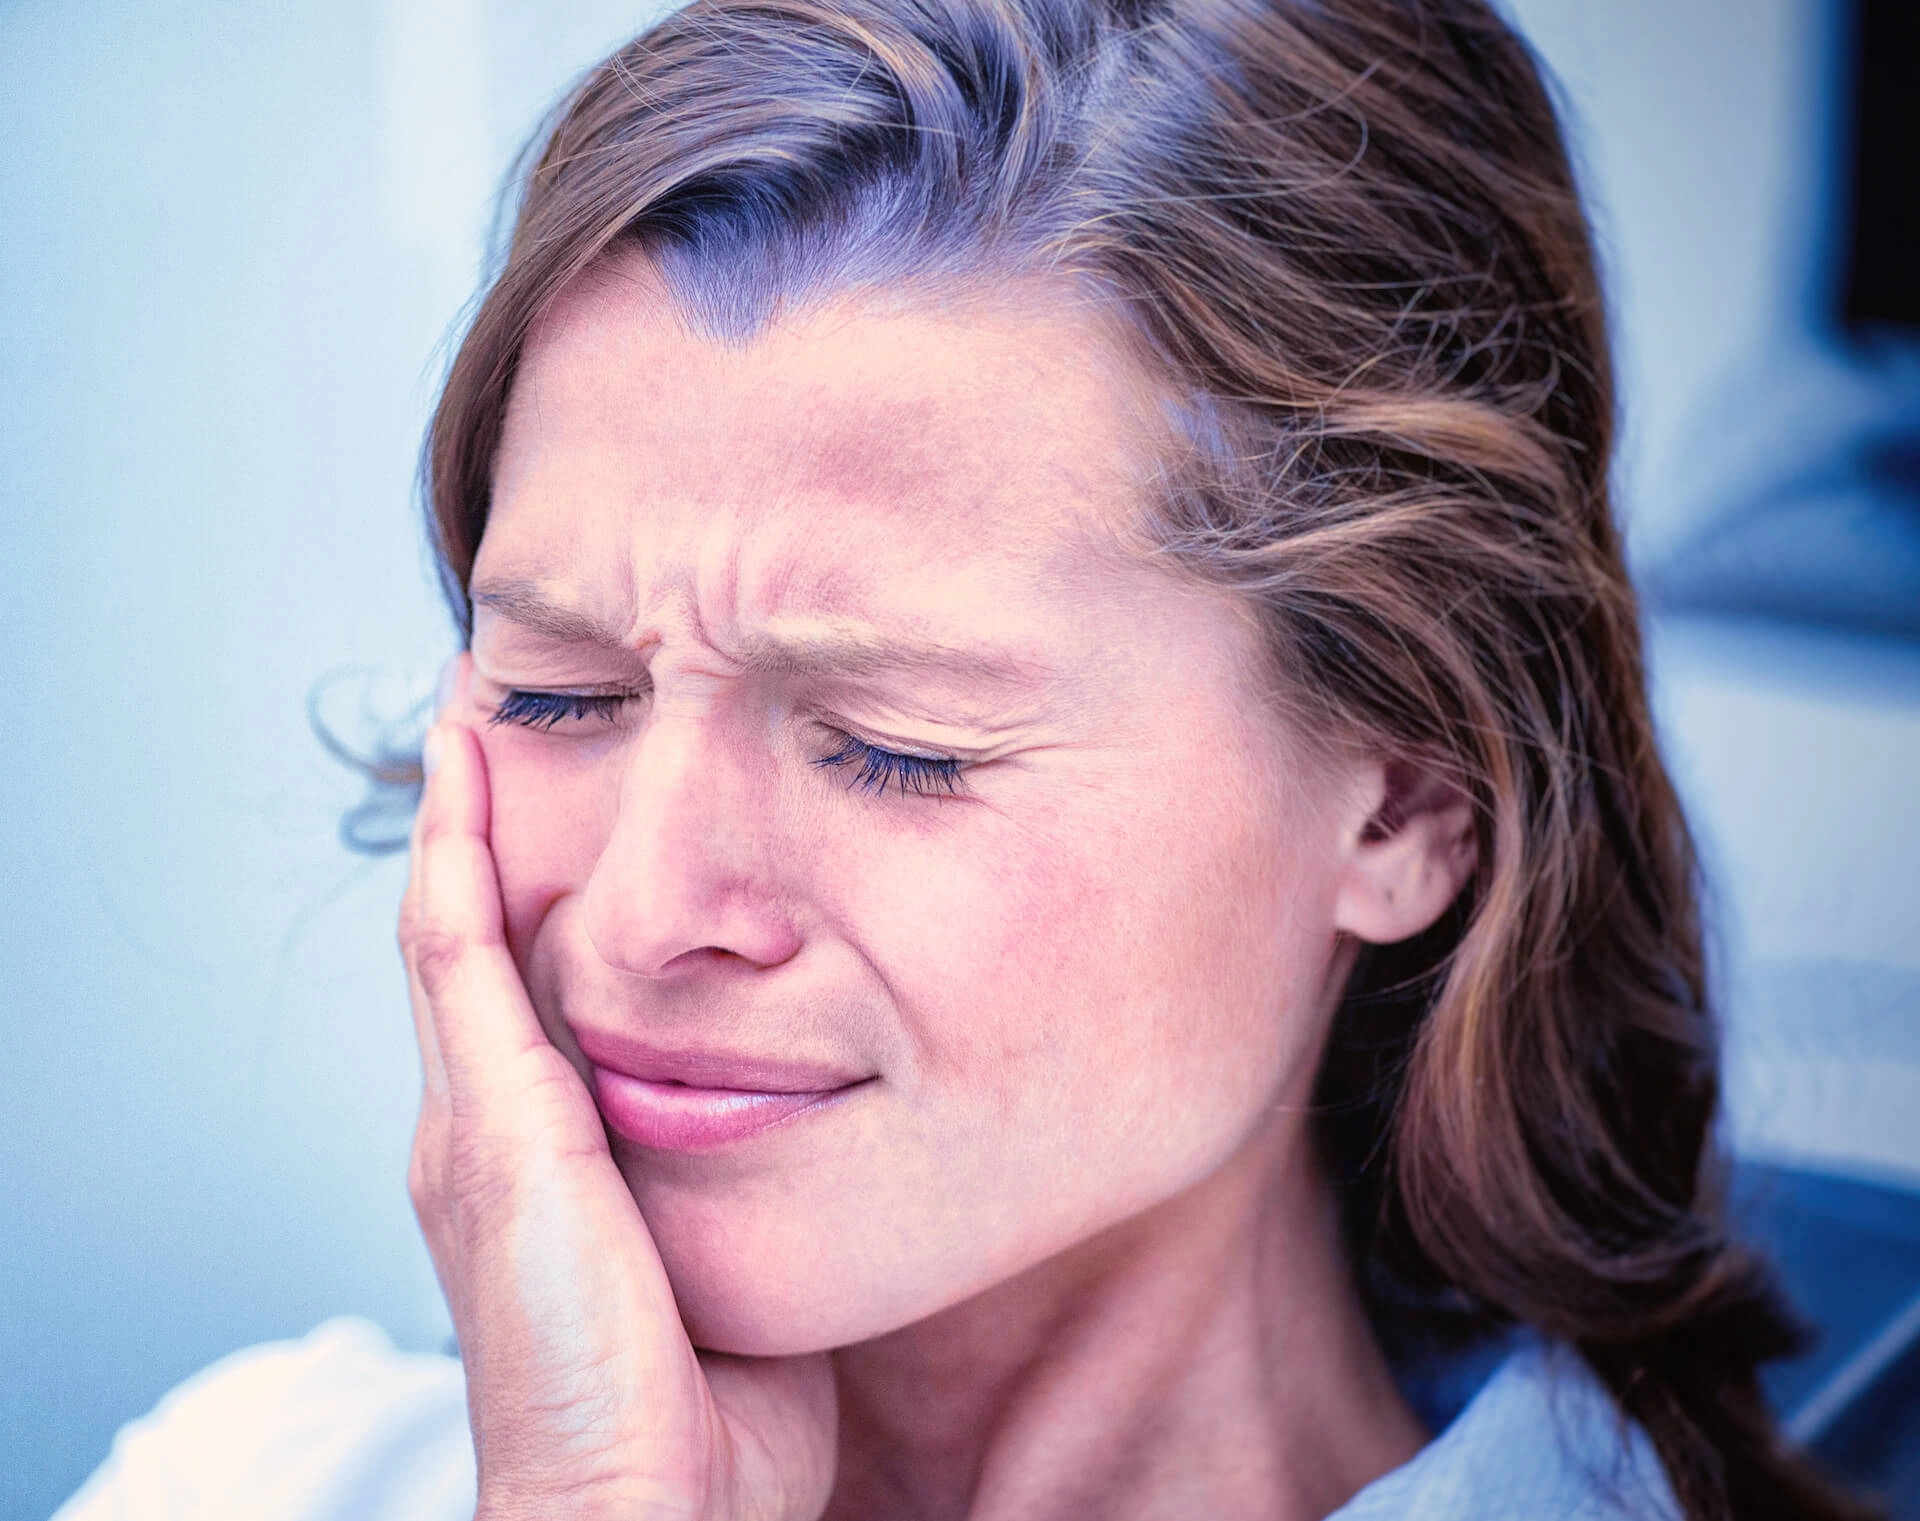 Pain management techniques post-tooth extraction